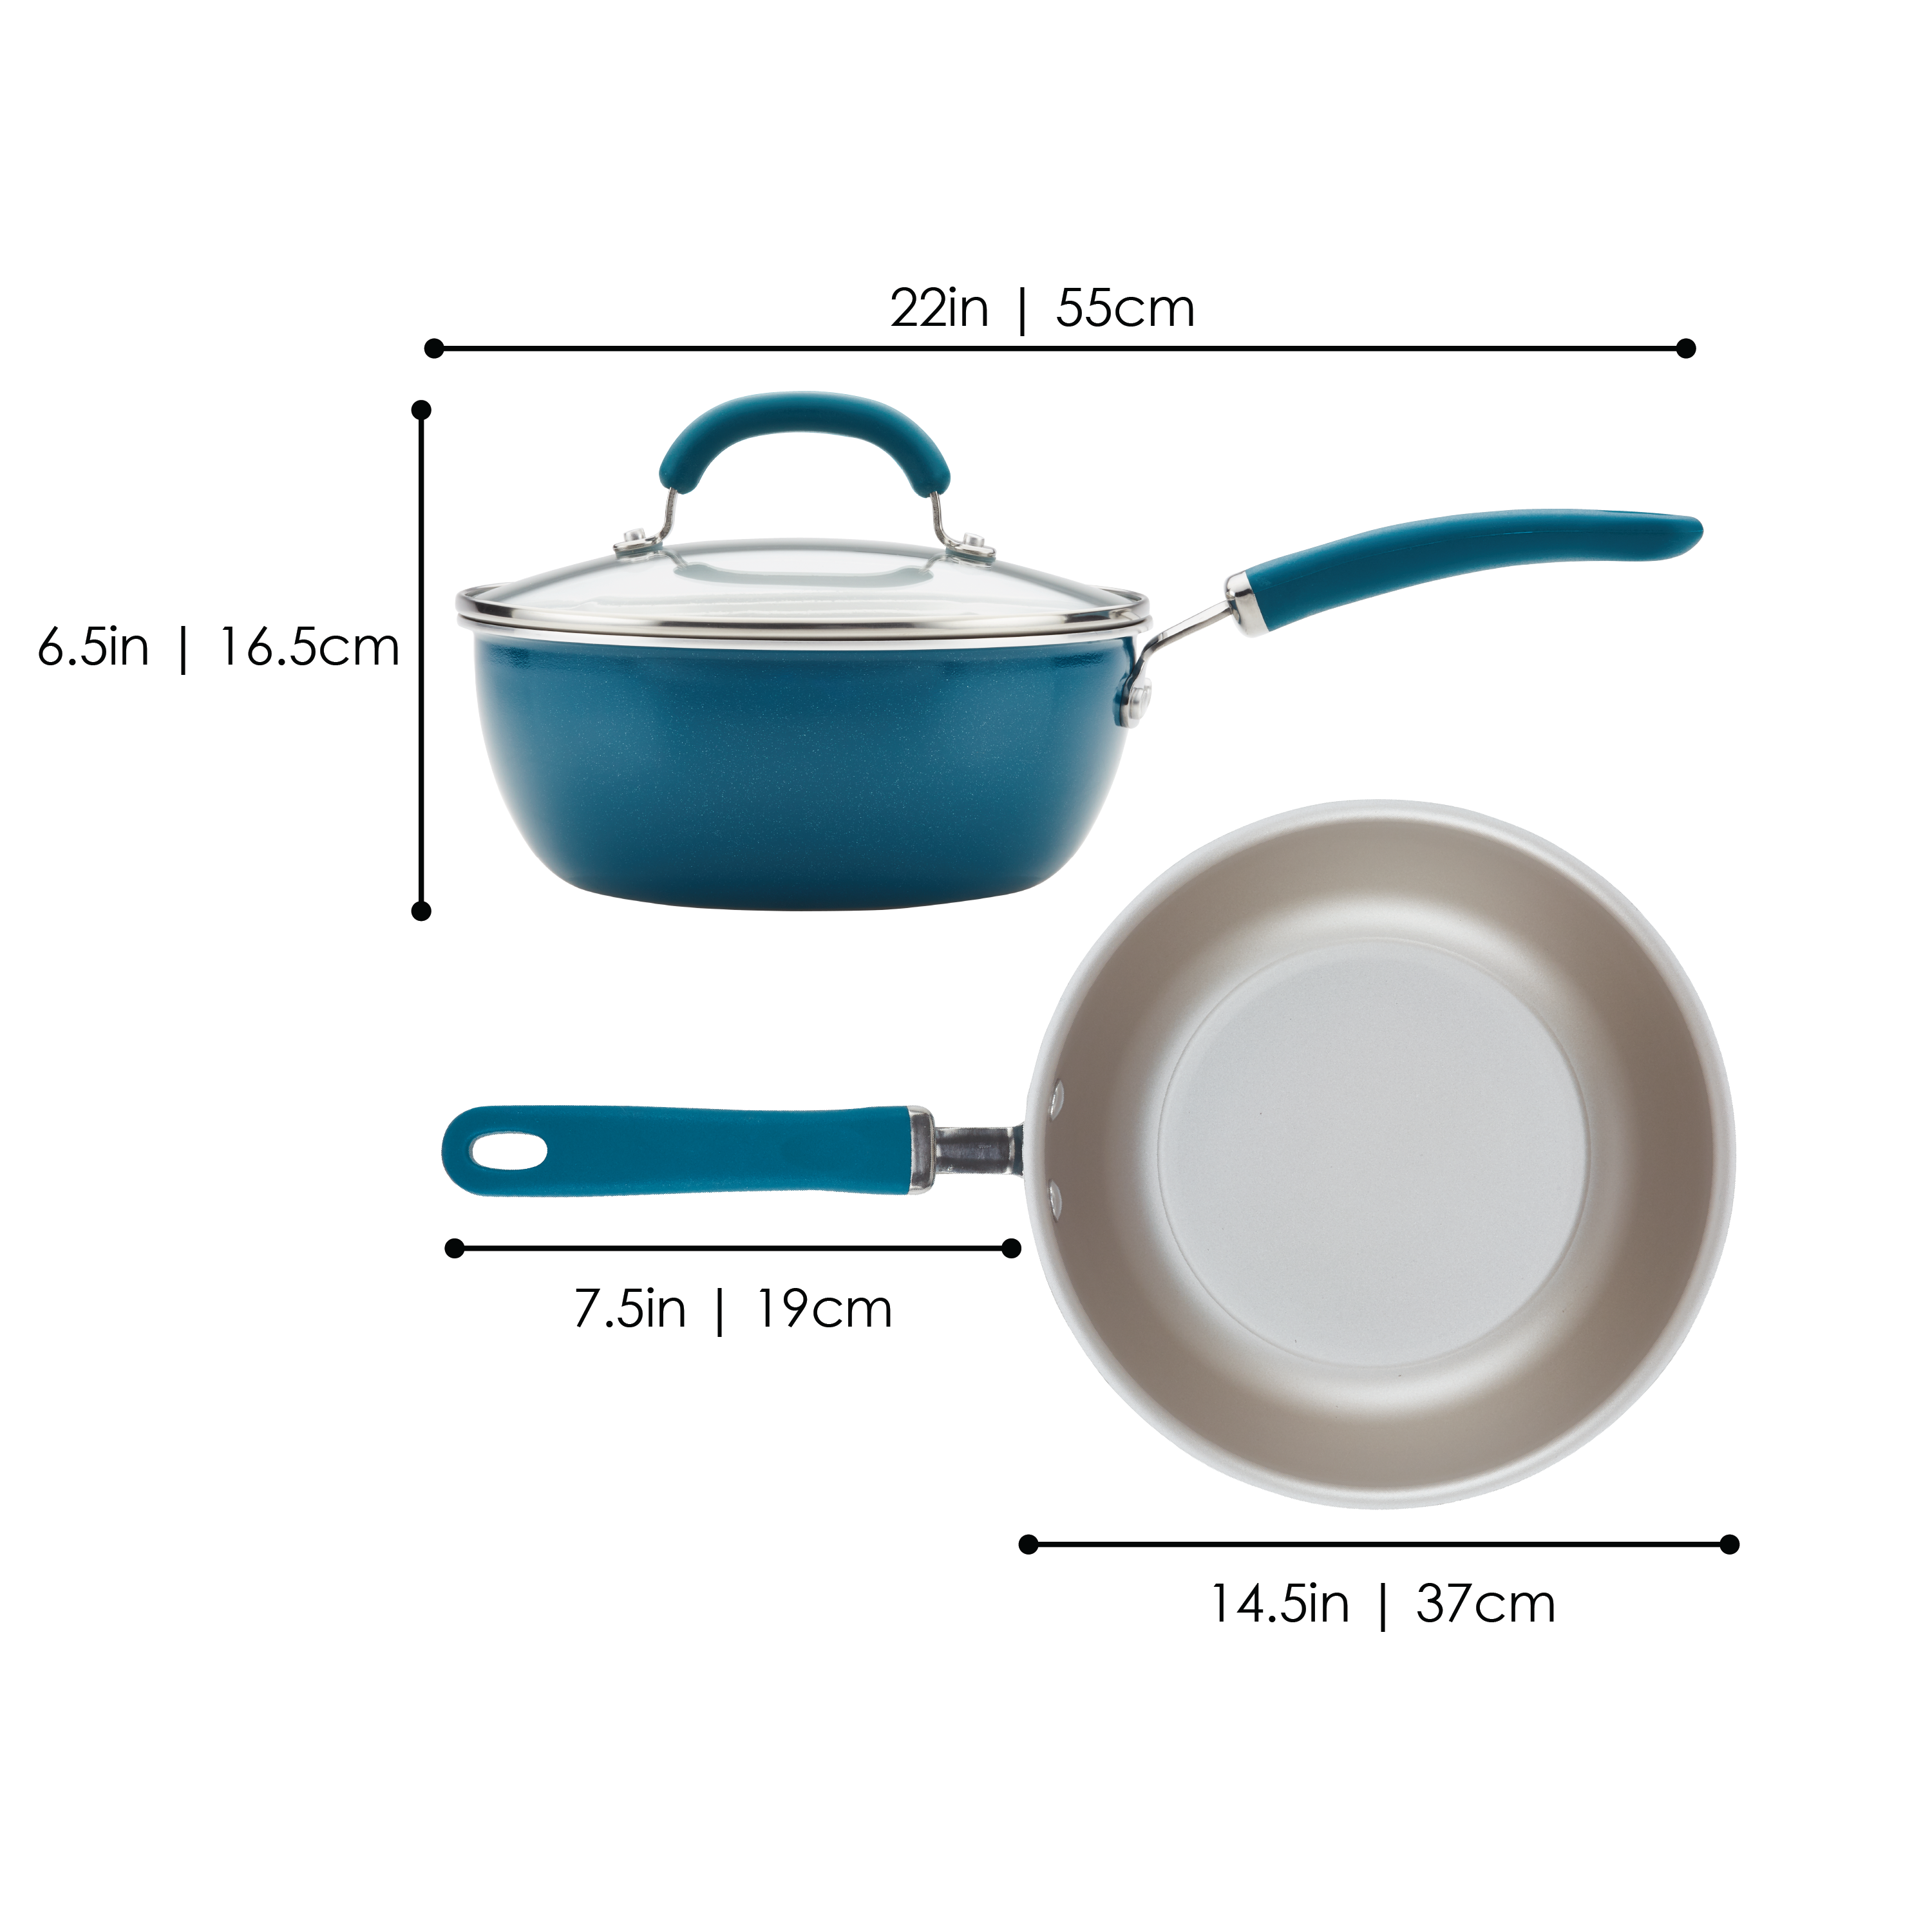 Rachael Ray Create Delicious Nonstick Cookware Pots and Pans Set, 13 Piece,  Teal Shimmer